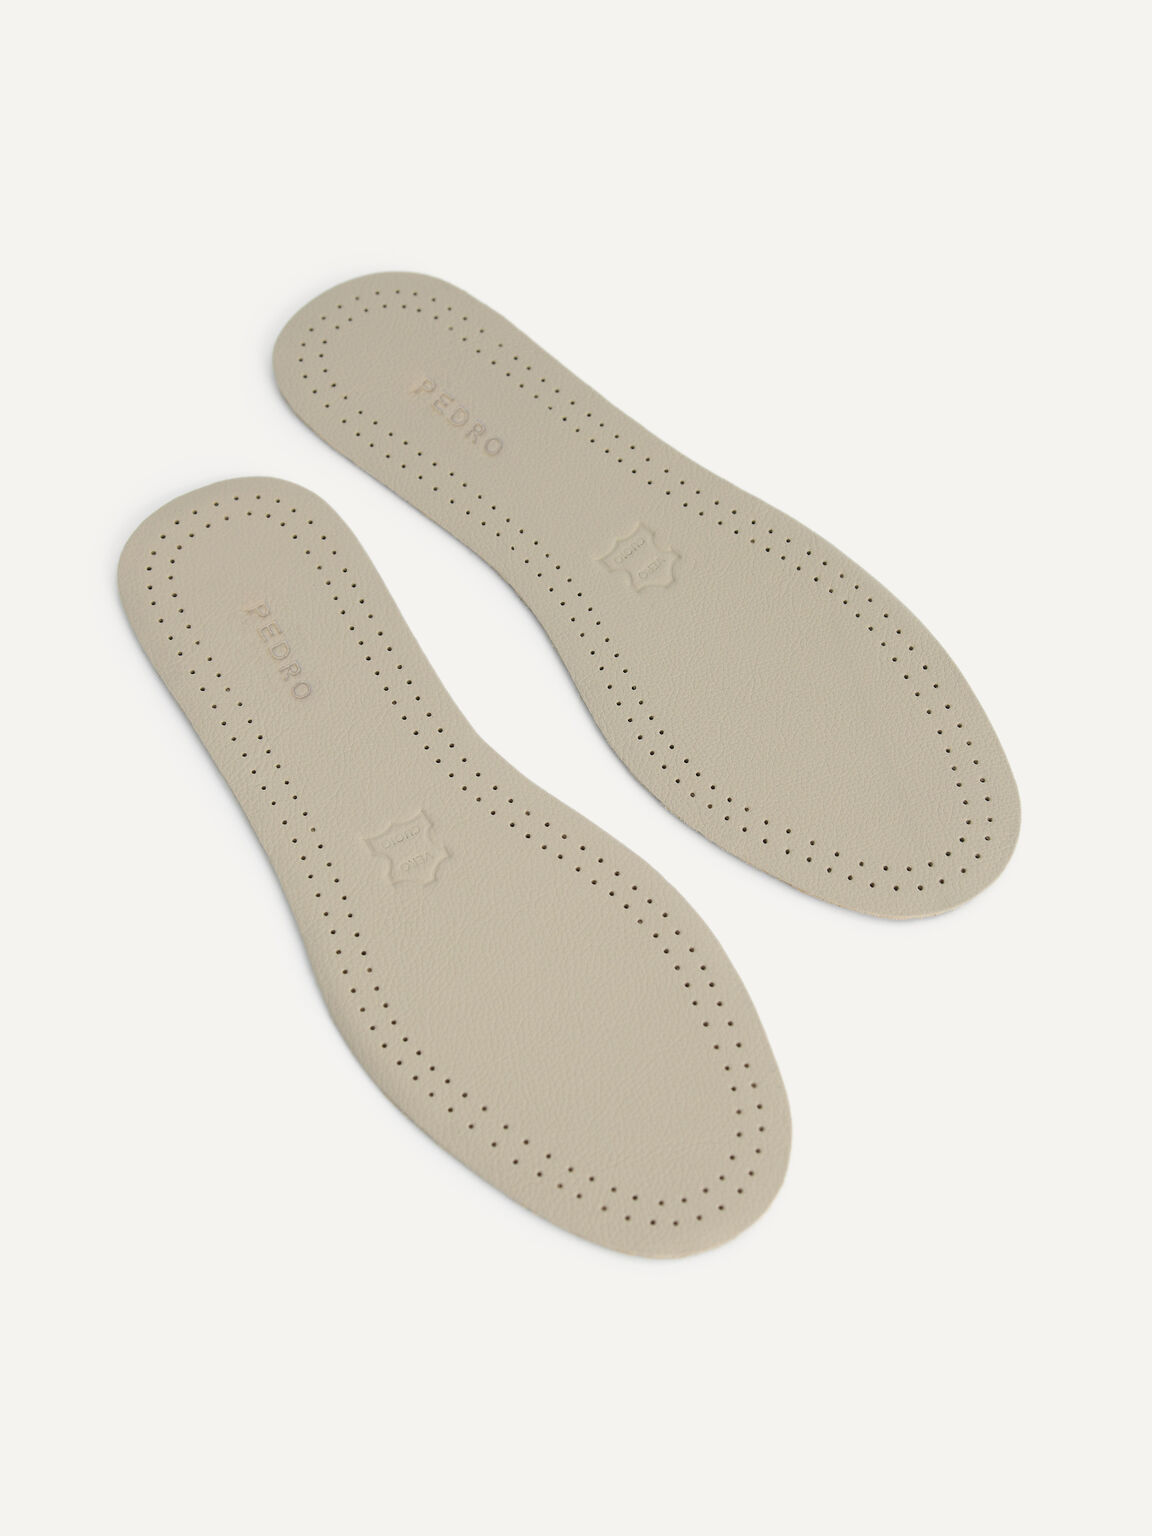 Genuine Leather Insole (L), Beige, hi-res